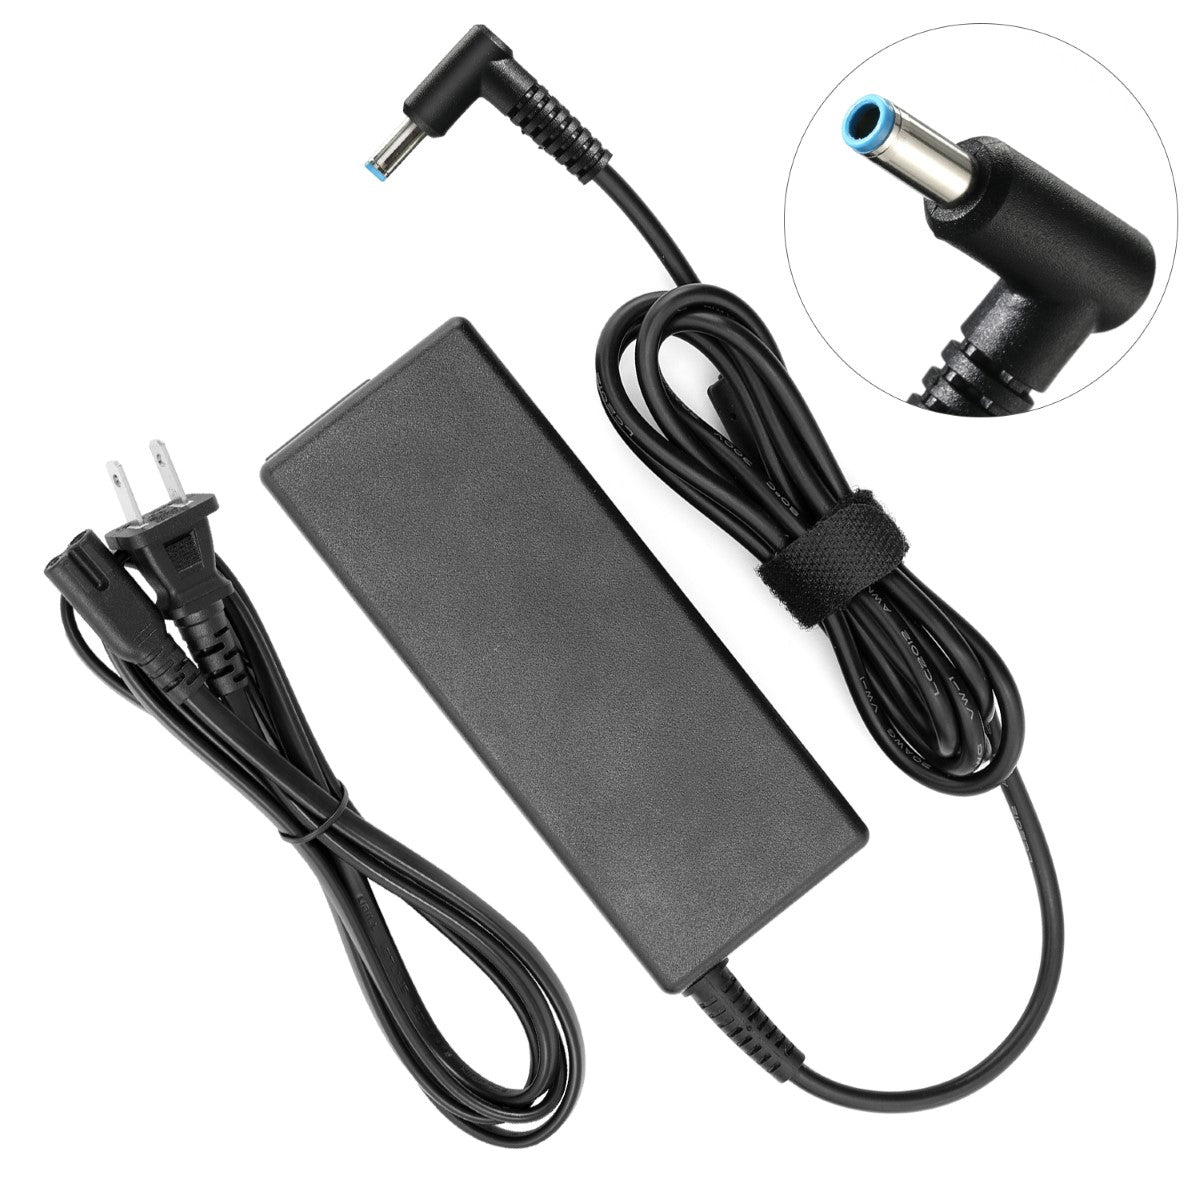 AC Adapter Charger for HP Pavilion 11-h010nr x2 Notebook.